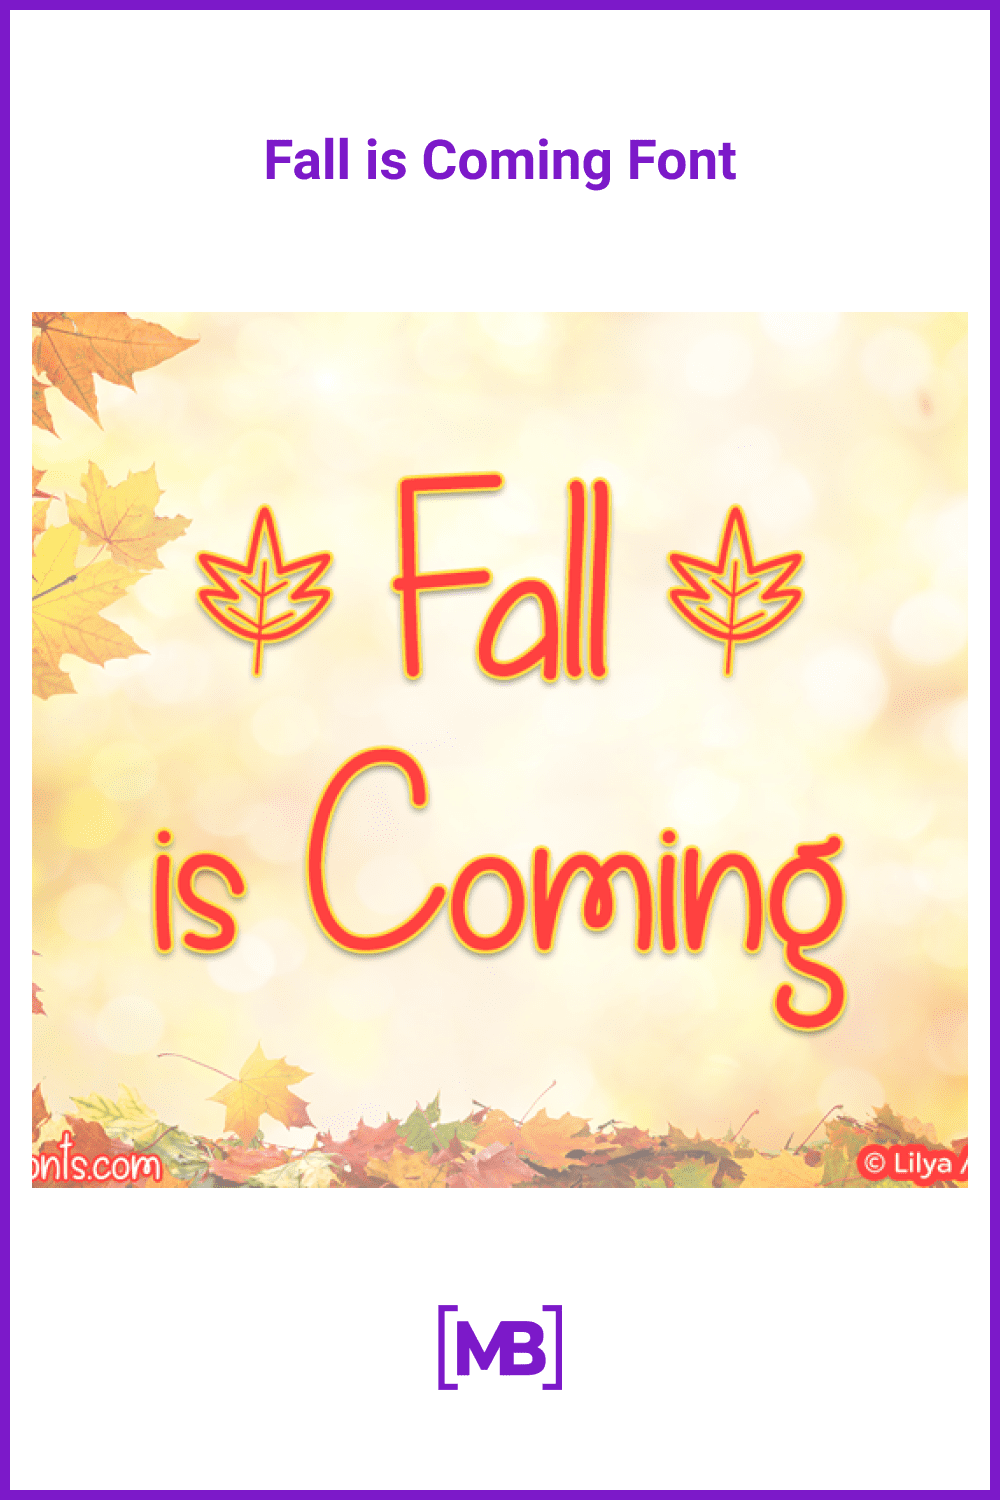 Fall is coming font by Misti's Fonts.